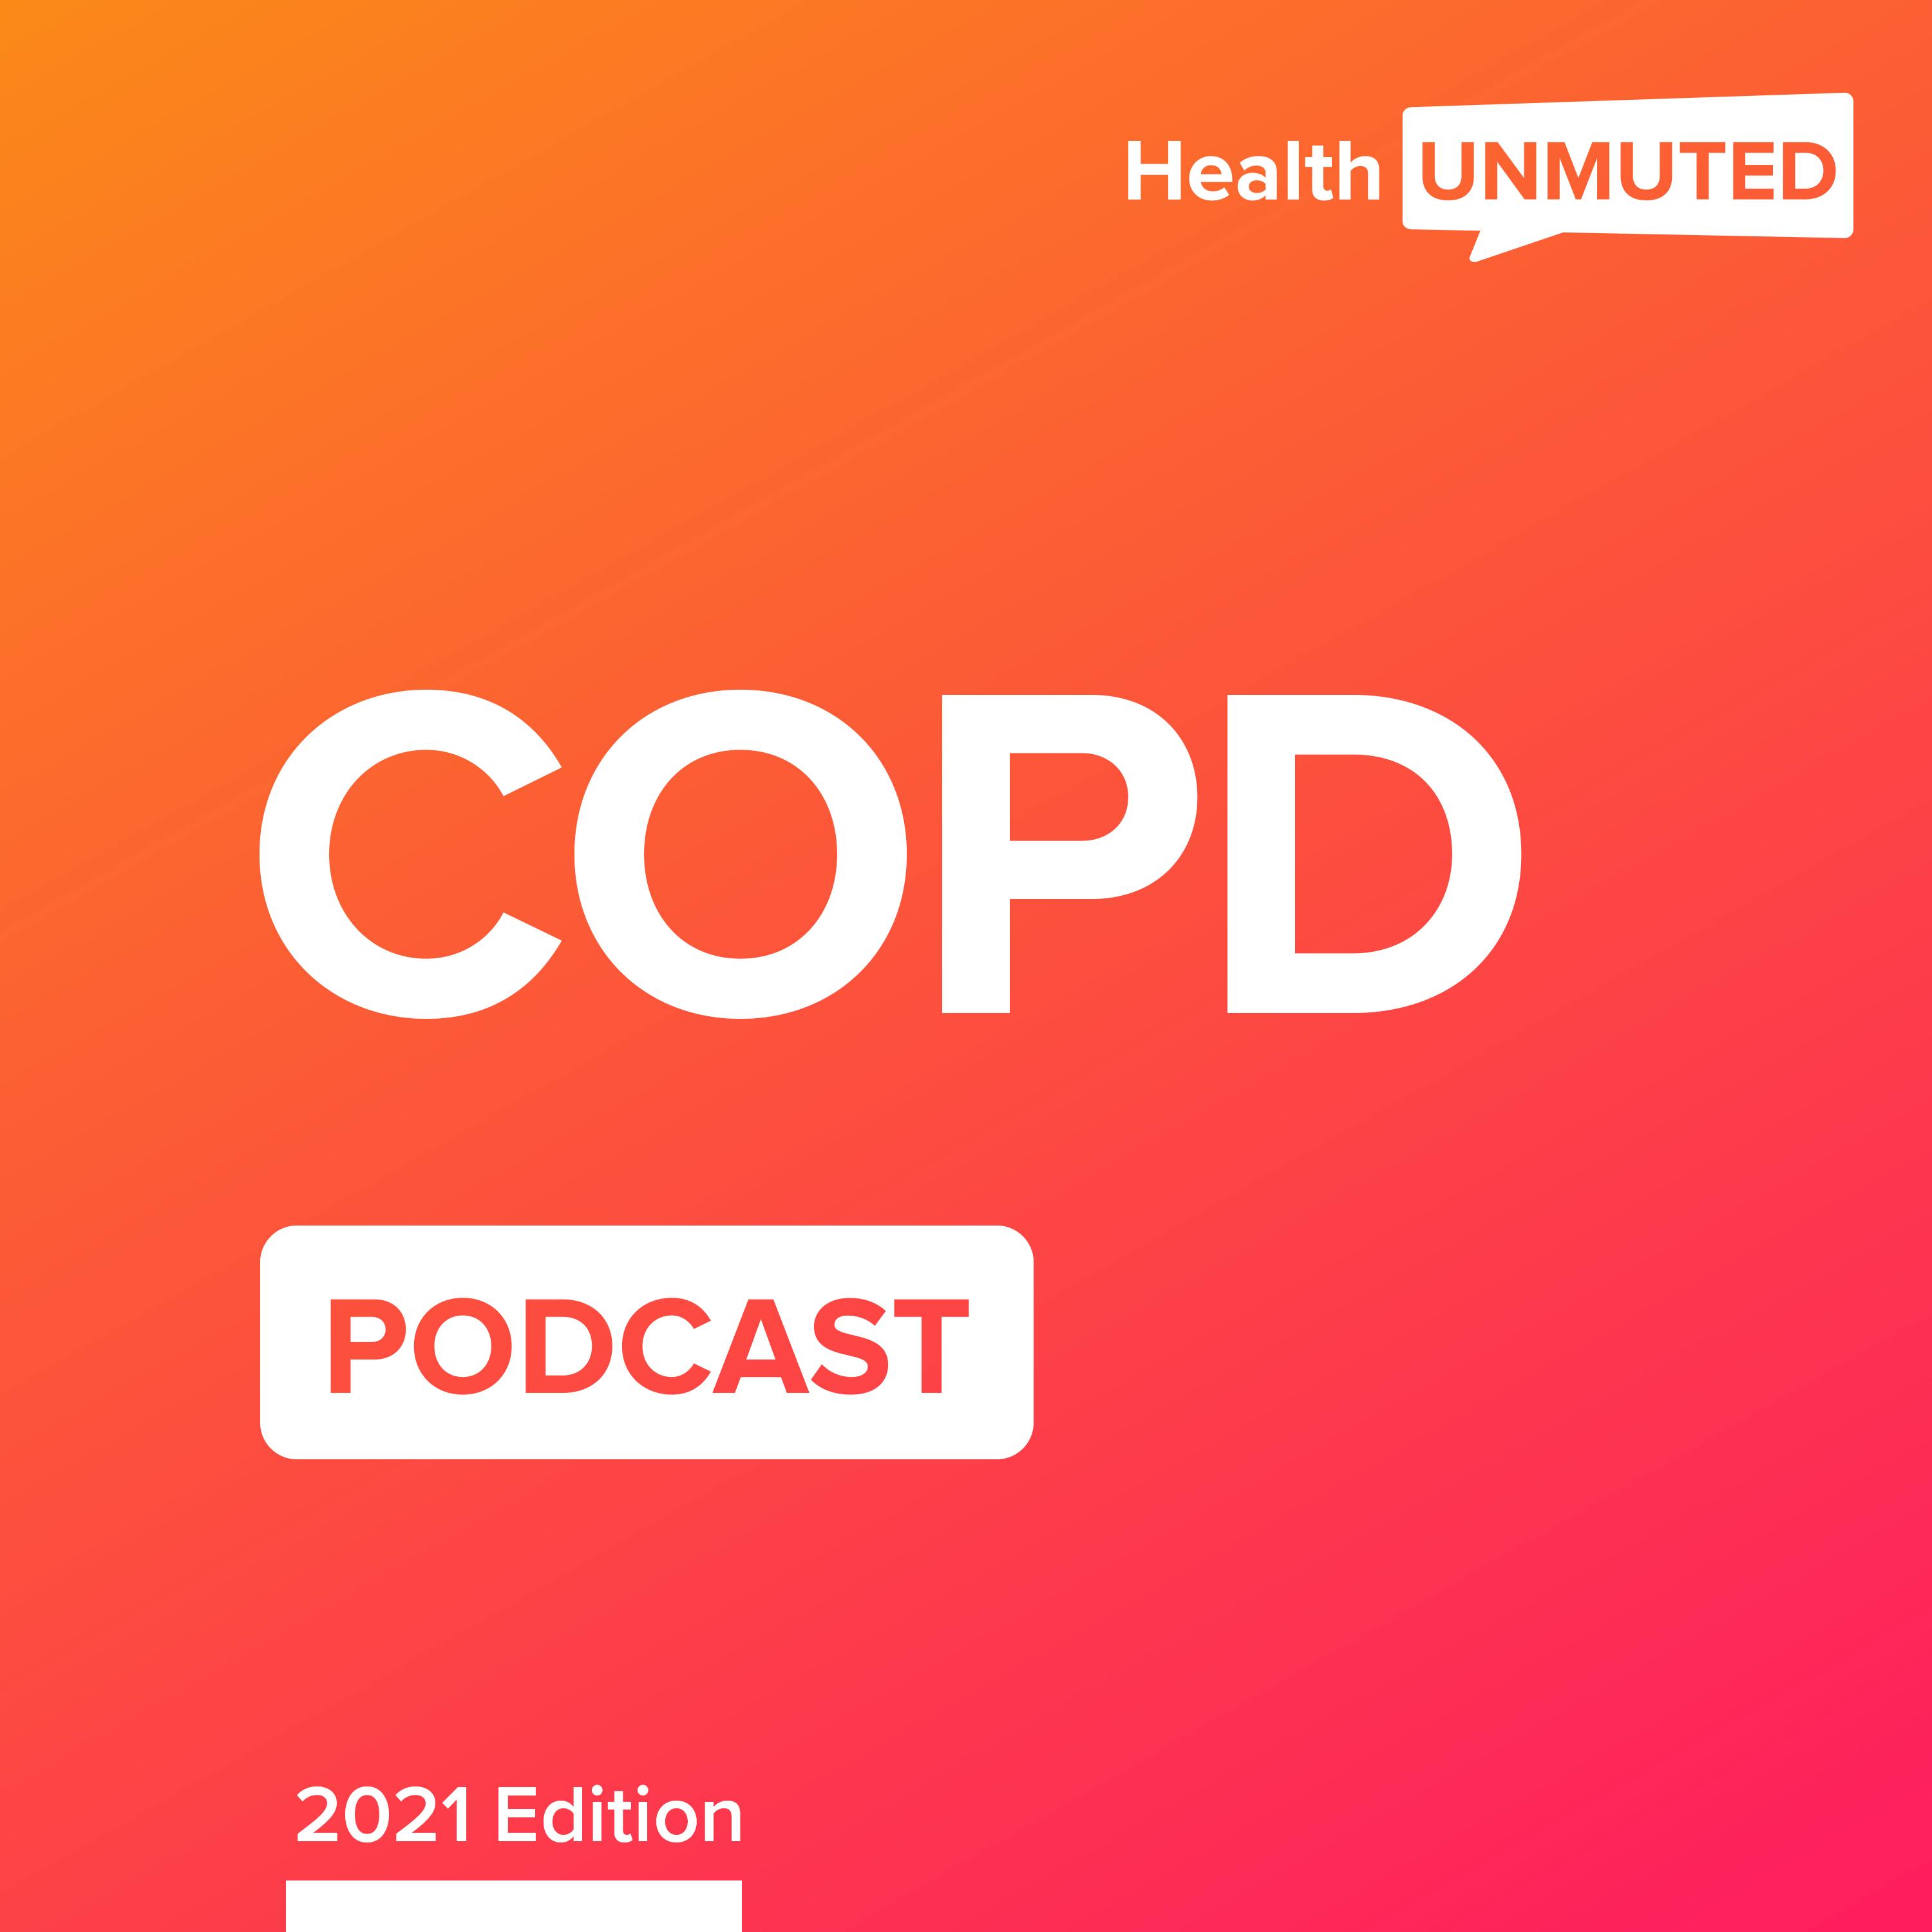 Welcome to the COPD Podcast